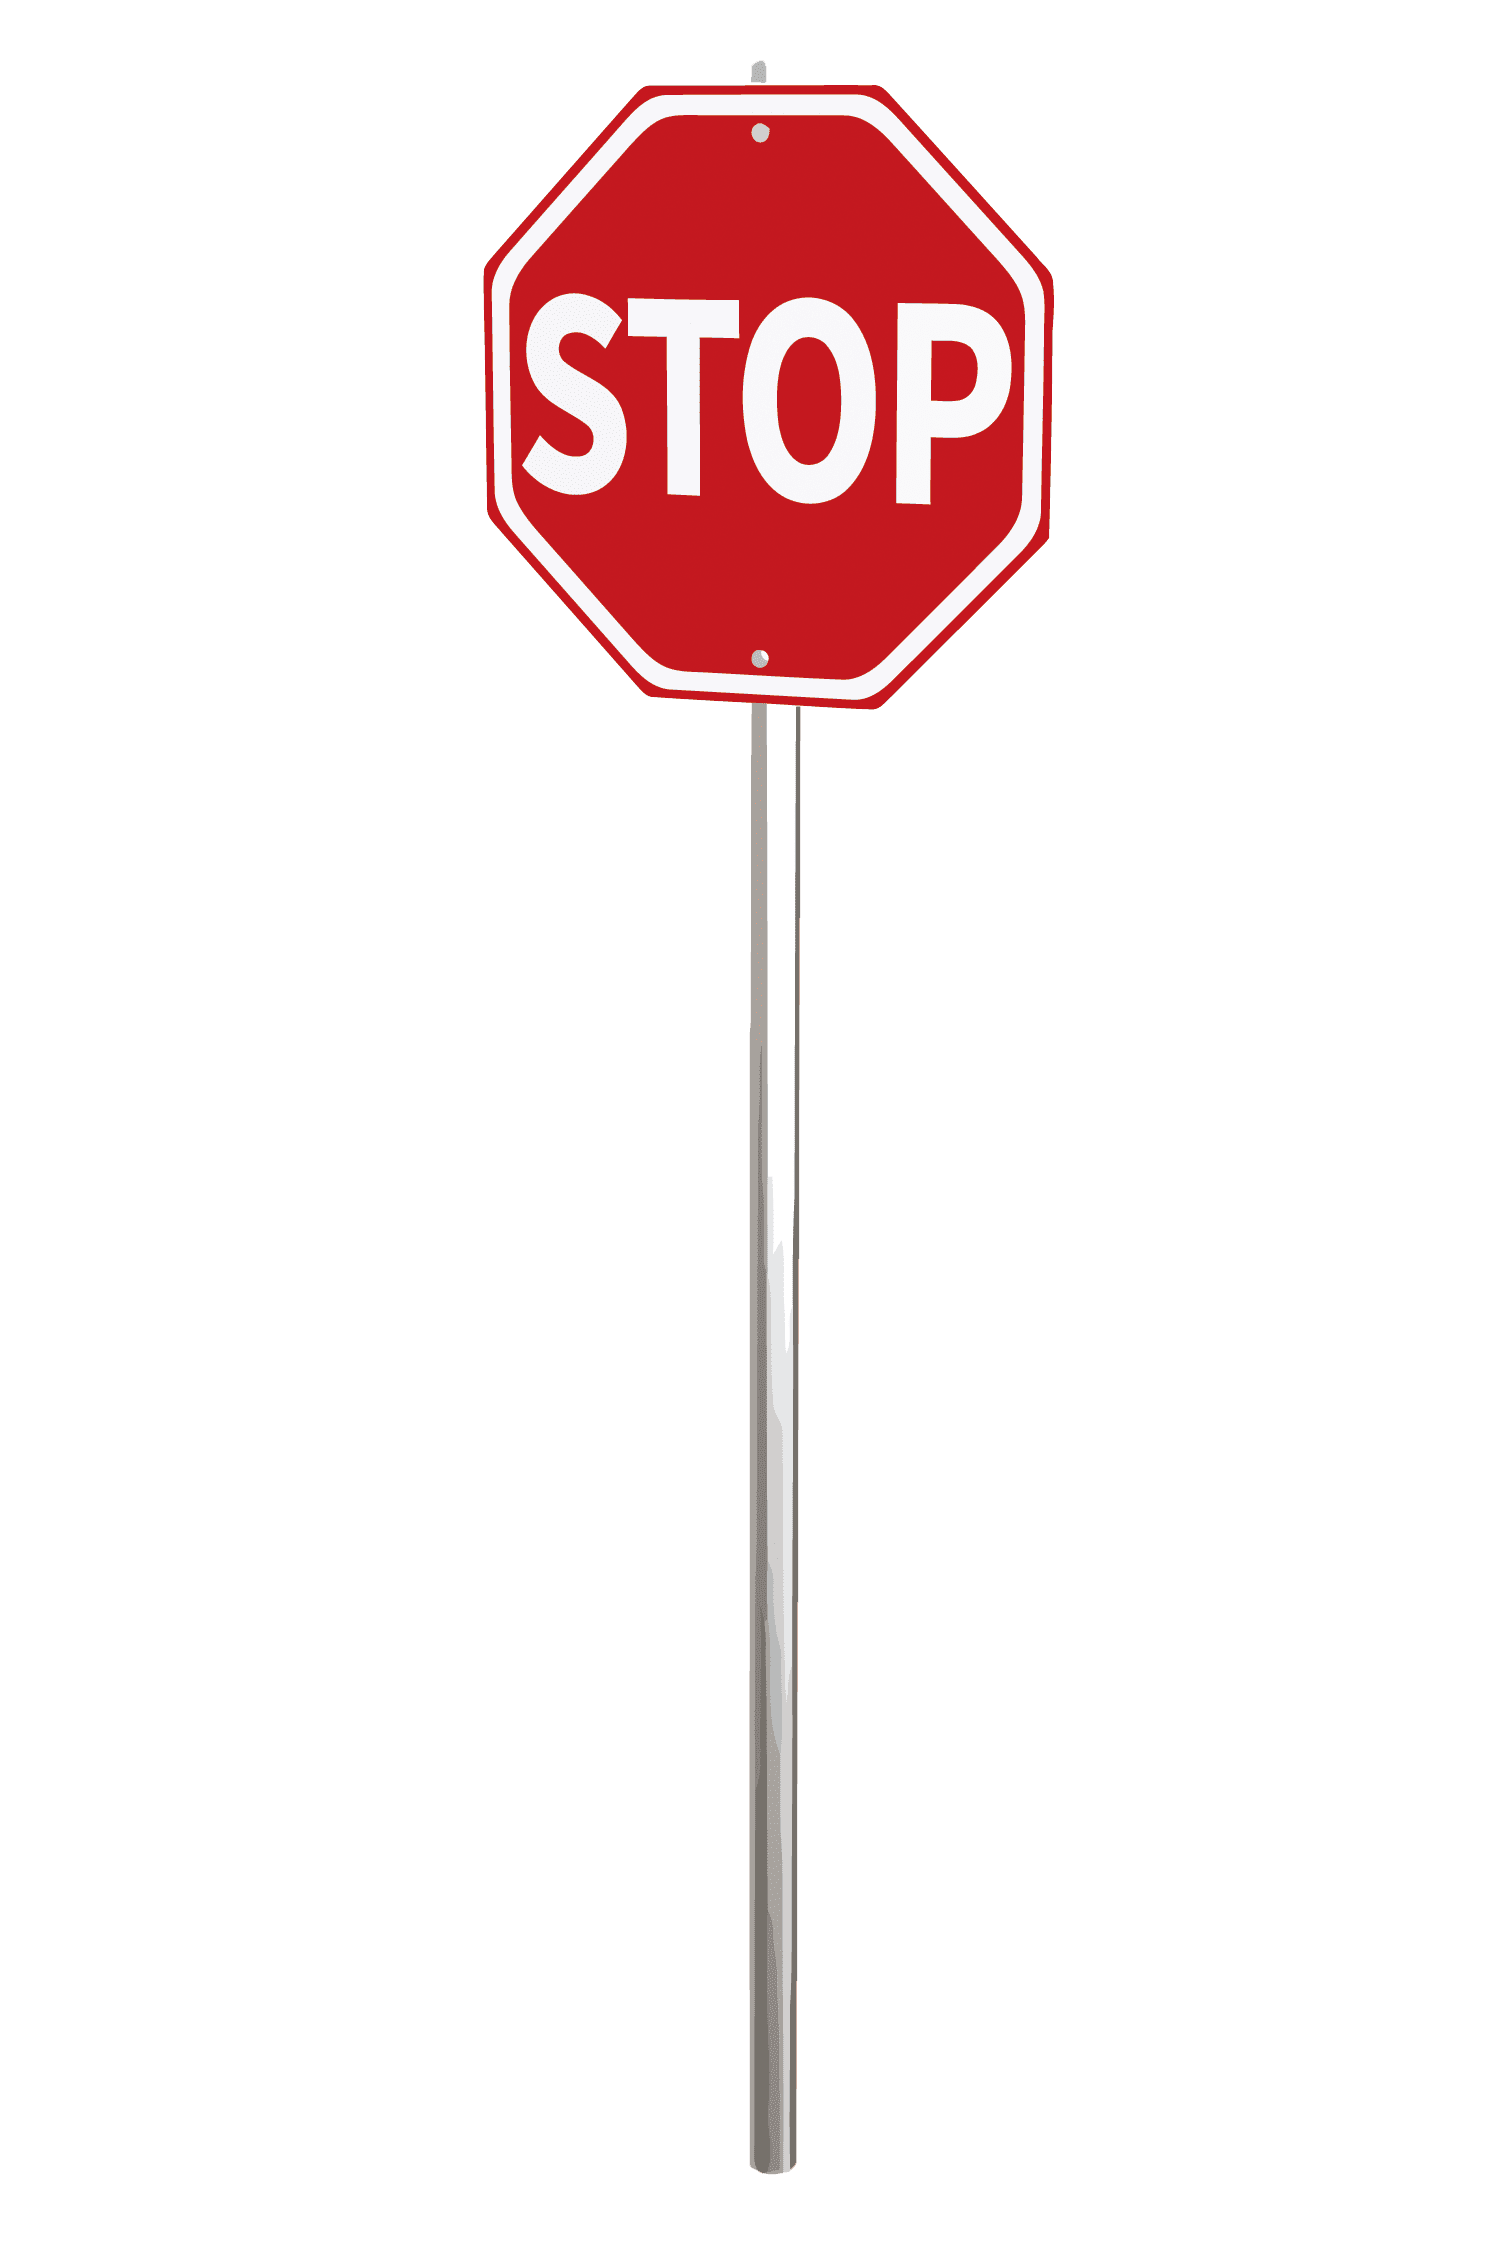 Stop signal sign images all clipart